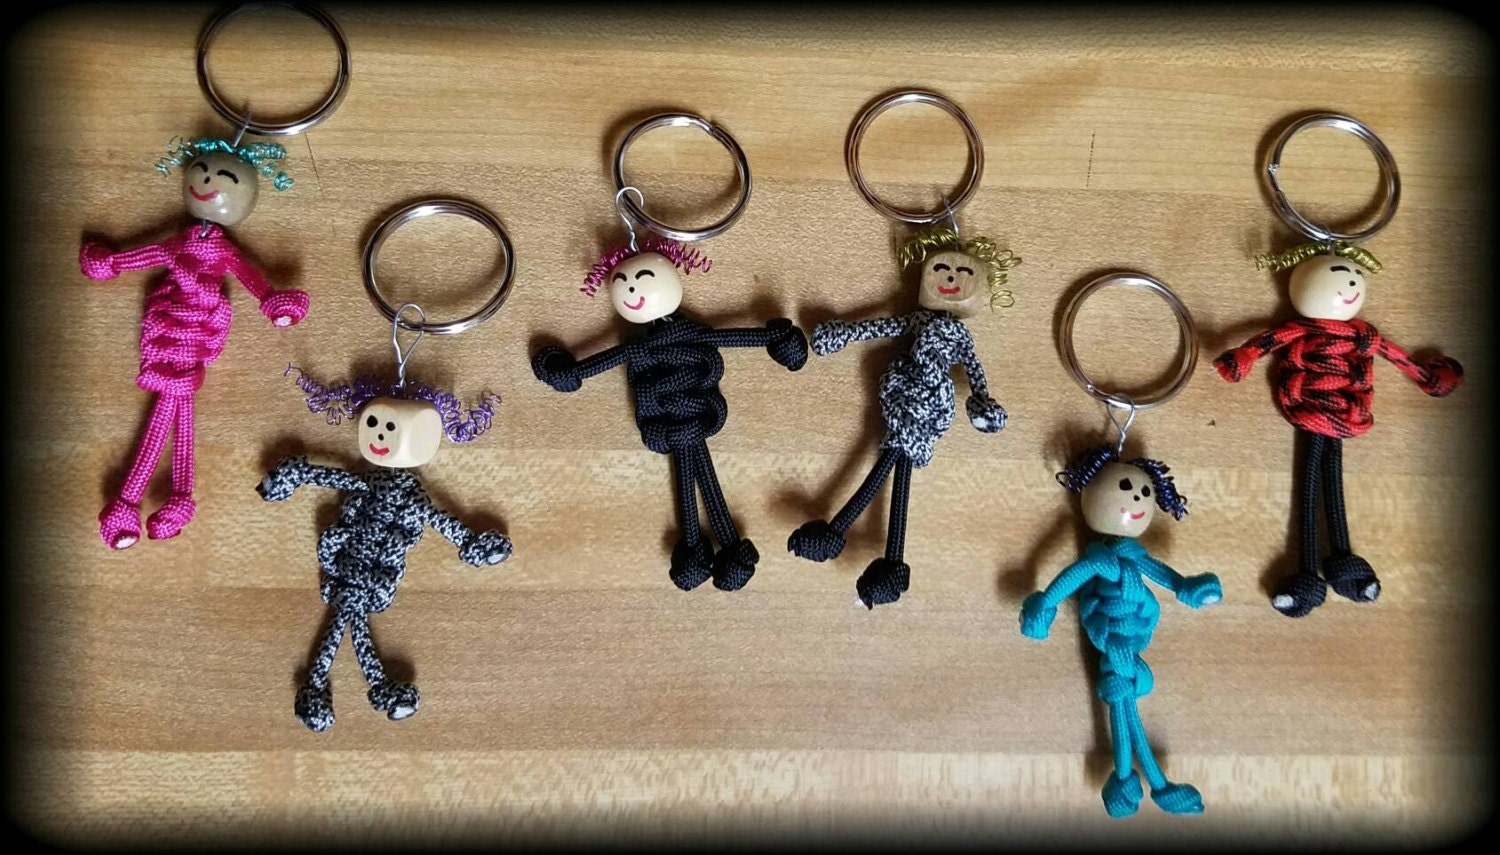 Paracord people keychains and zipper charms by UpcycledGarden1